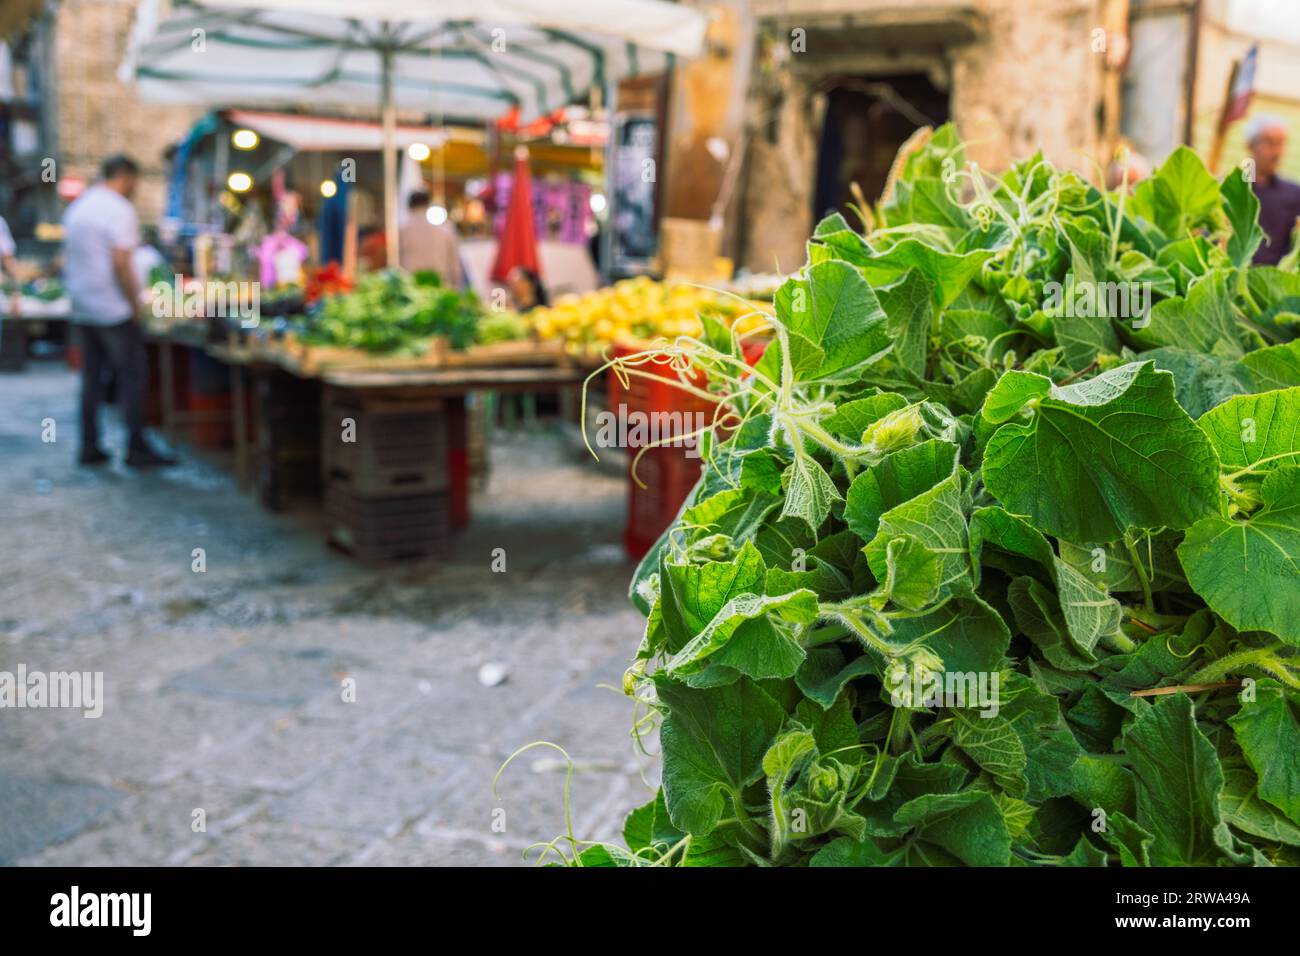 Tenerumi, leaves and tender shoots of the long squash plant cucuzza on Palermo market Stock Photo